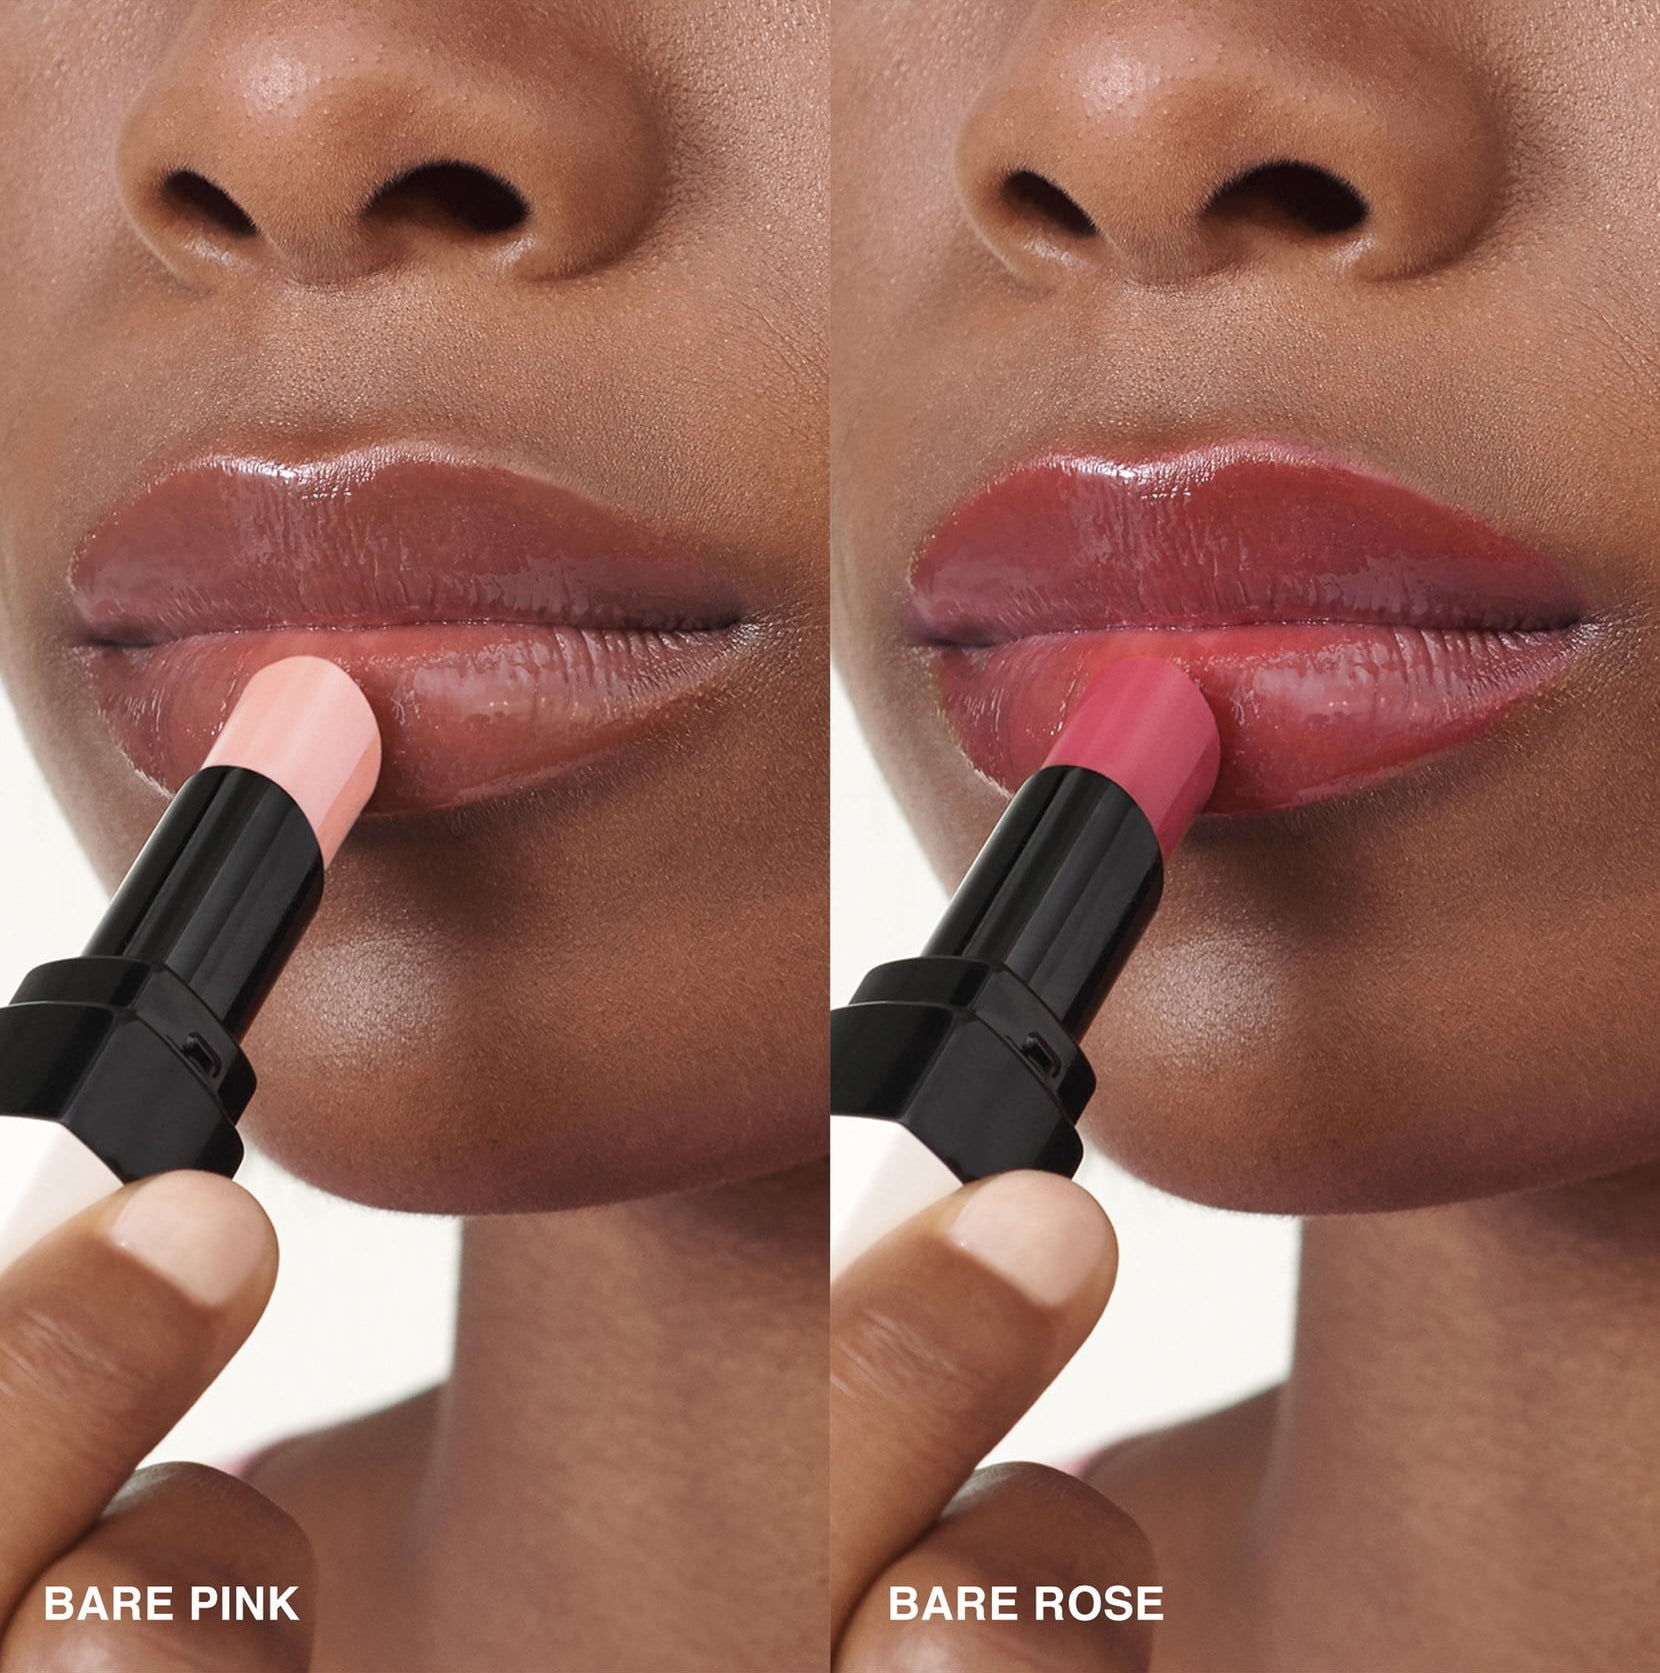 Model applying the two pink lipsticks in two different pictures